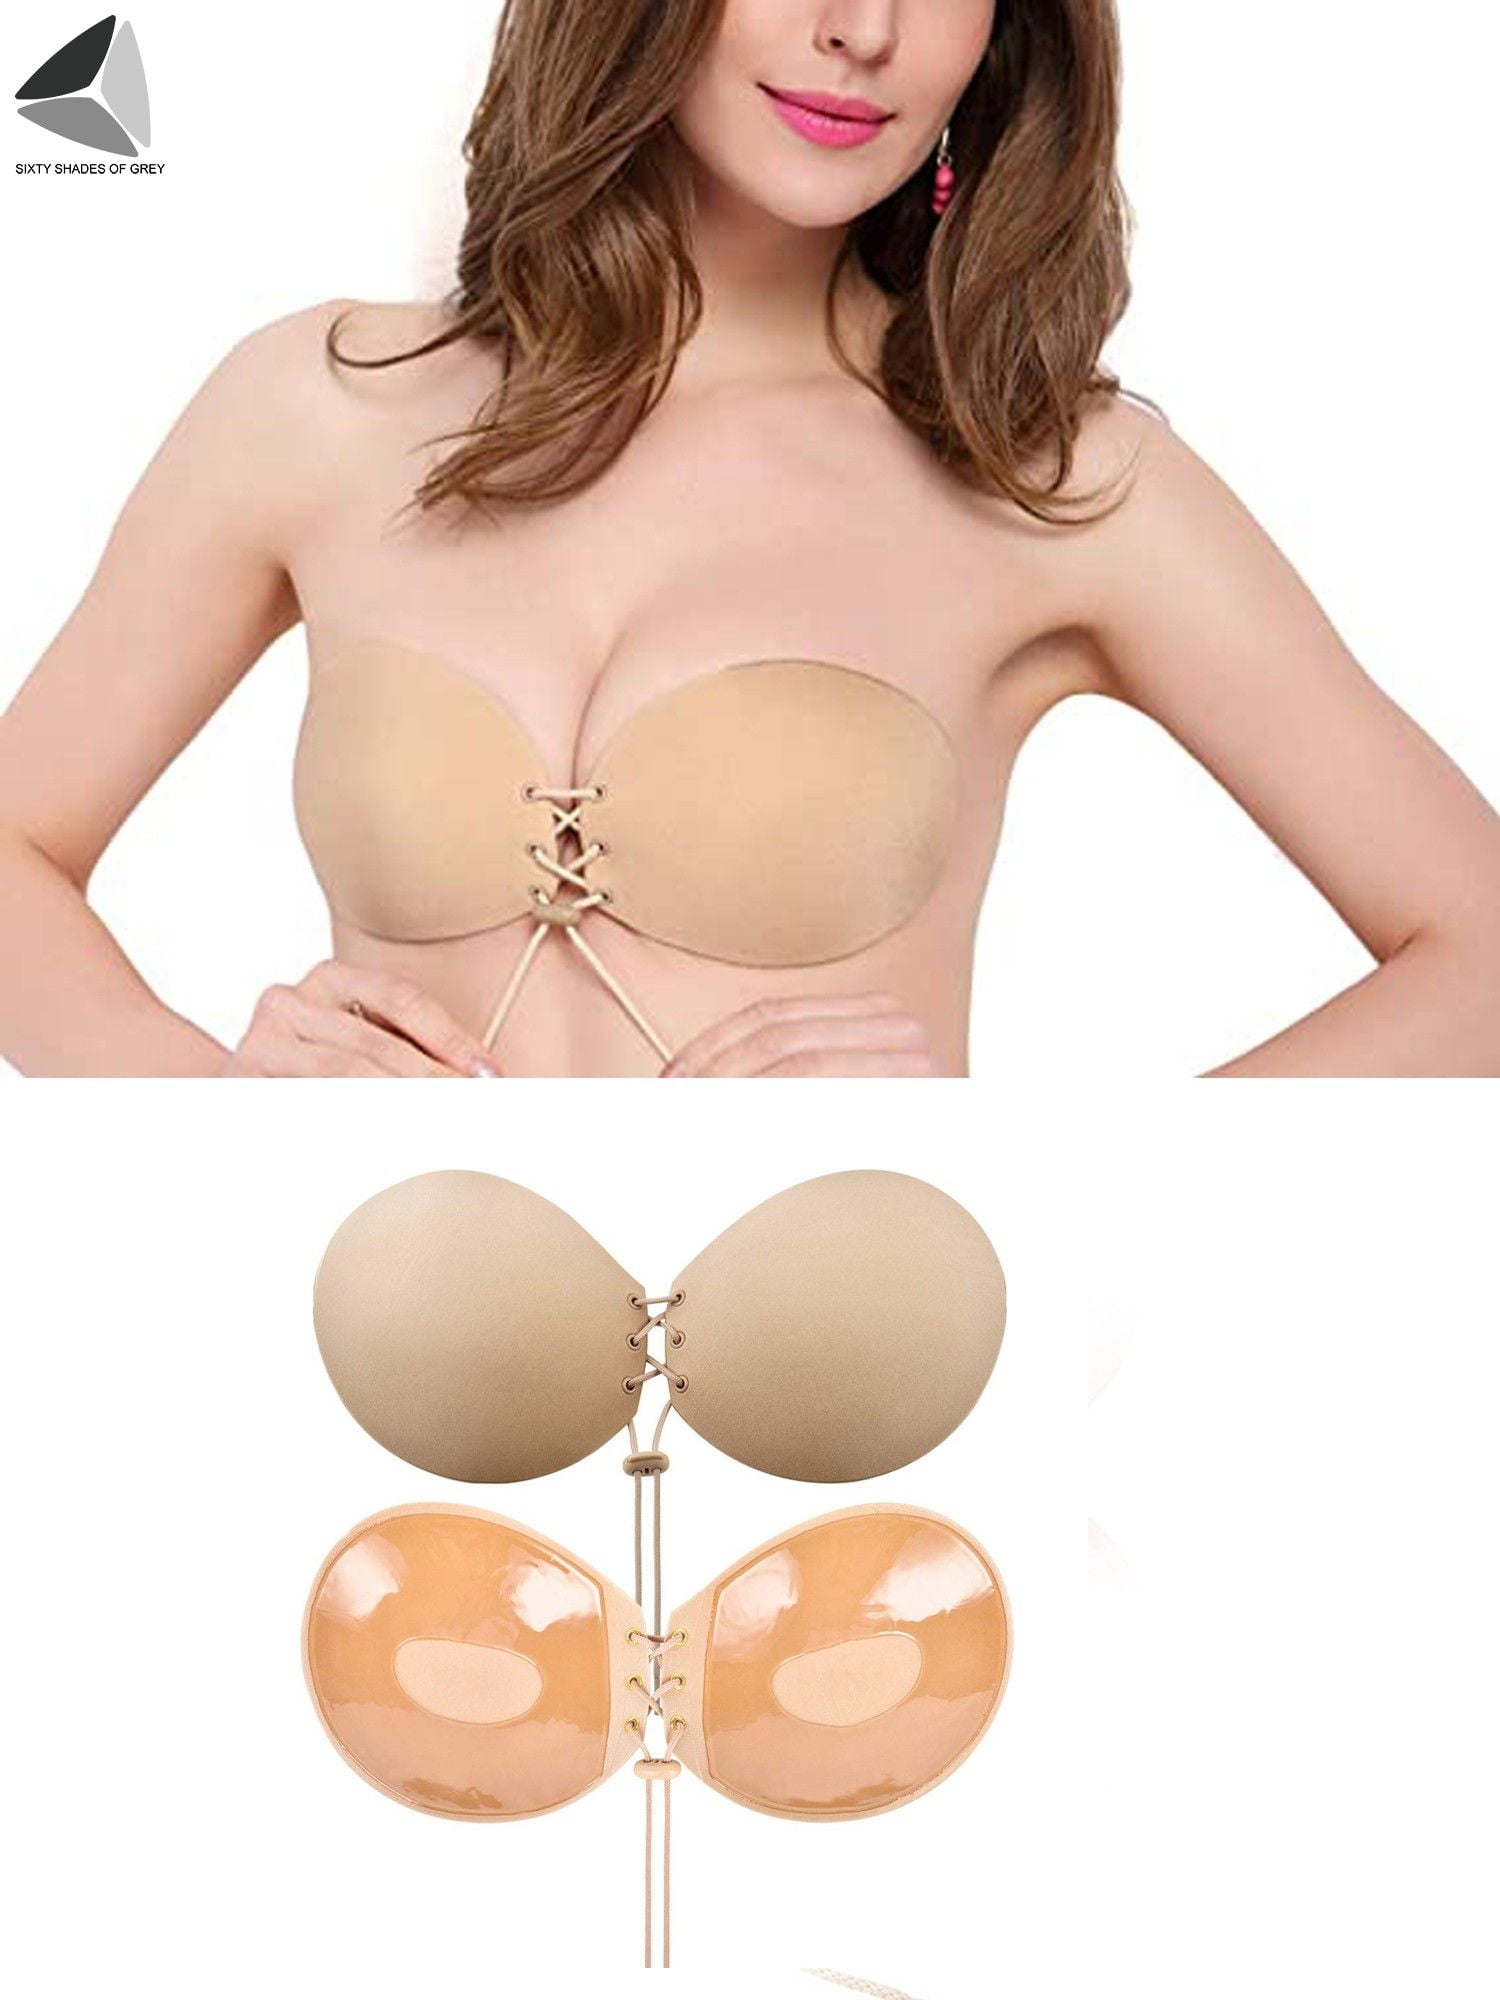 PULLIMORE Push Up Adhesive Bra Reusable Backless Sticky Bras for